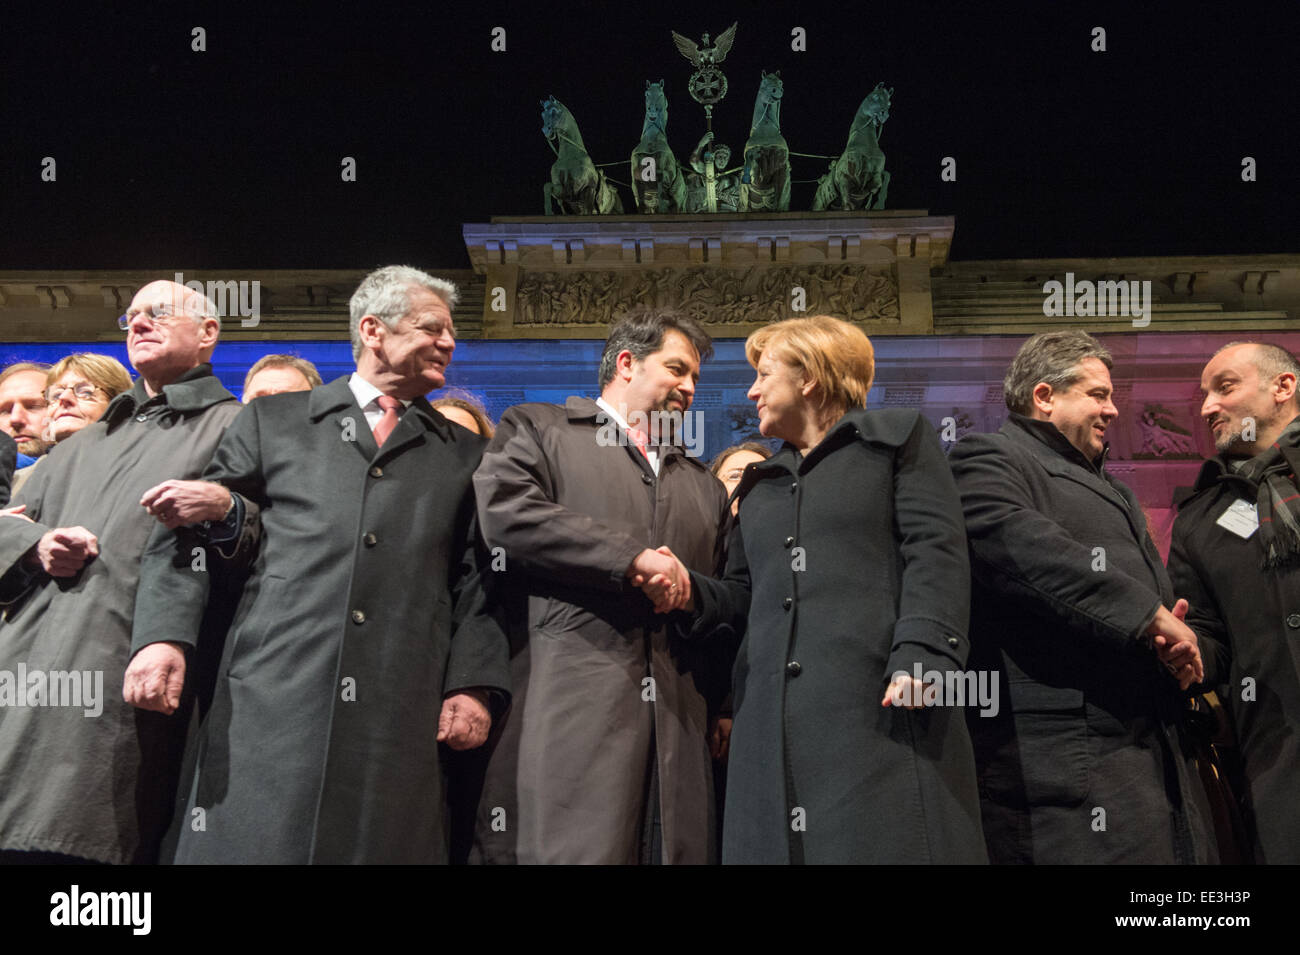 President of the Bundestag, Norbert Lammer (L-R), German President Joachim Gauck, chairman of the Central Committee of Muslims in Germany, Aiman Mazyek, Chancellor Angela Merkel, Minister of Economic Affairs Sigmar Gabirel, and the chairman of the Turkish Community in Berlin, Bekir Yilmaz, attend a vigil for the victims of the attacks in France at the Brandenburg Gate in Berlin, Germany, 13 January 2015. The Central Committee of Muslims and the Turkish community have invoked the slogan 'Stand together - Show face' for the rally against Islamist terror and for the peaceful co-existence of the Stock Photo